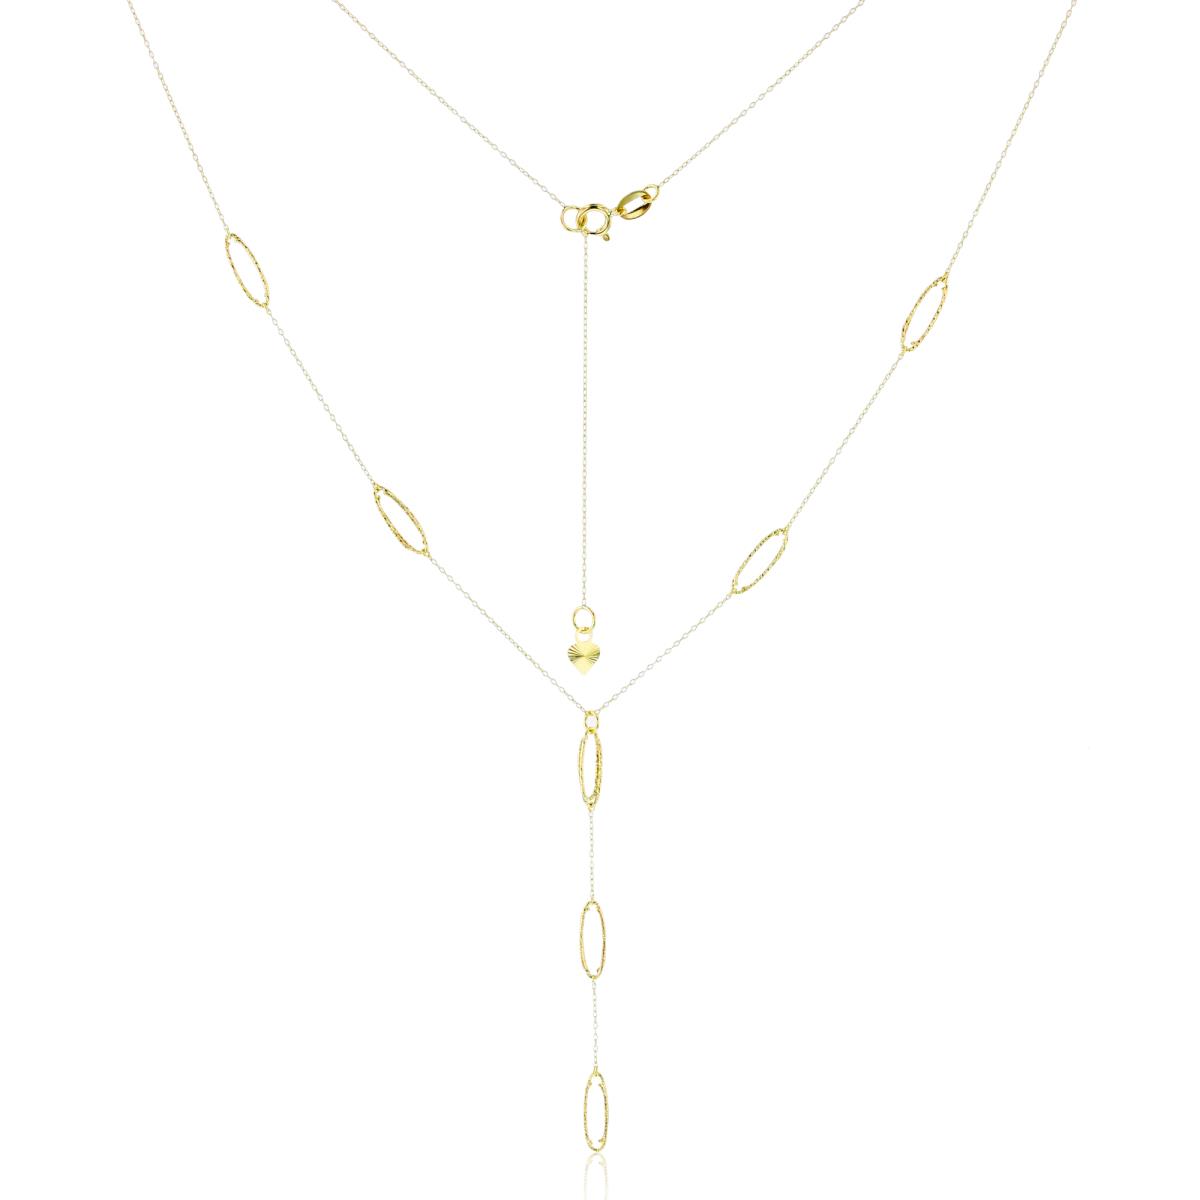 14K Yellow Gold Cable Chain with DC Twist Open Ovals Swiss DC Heart Back Drop 16+2" Necklace